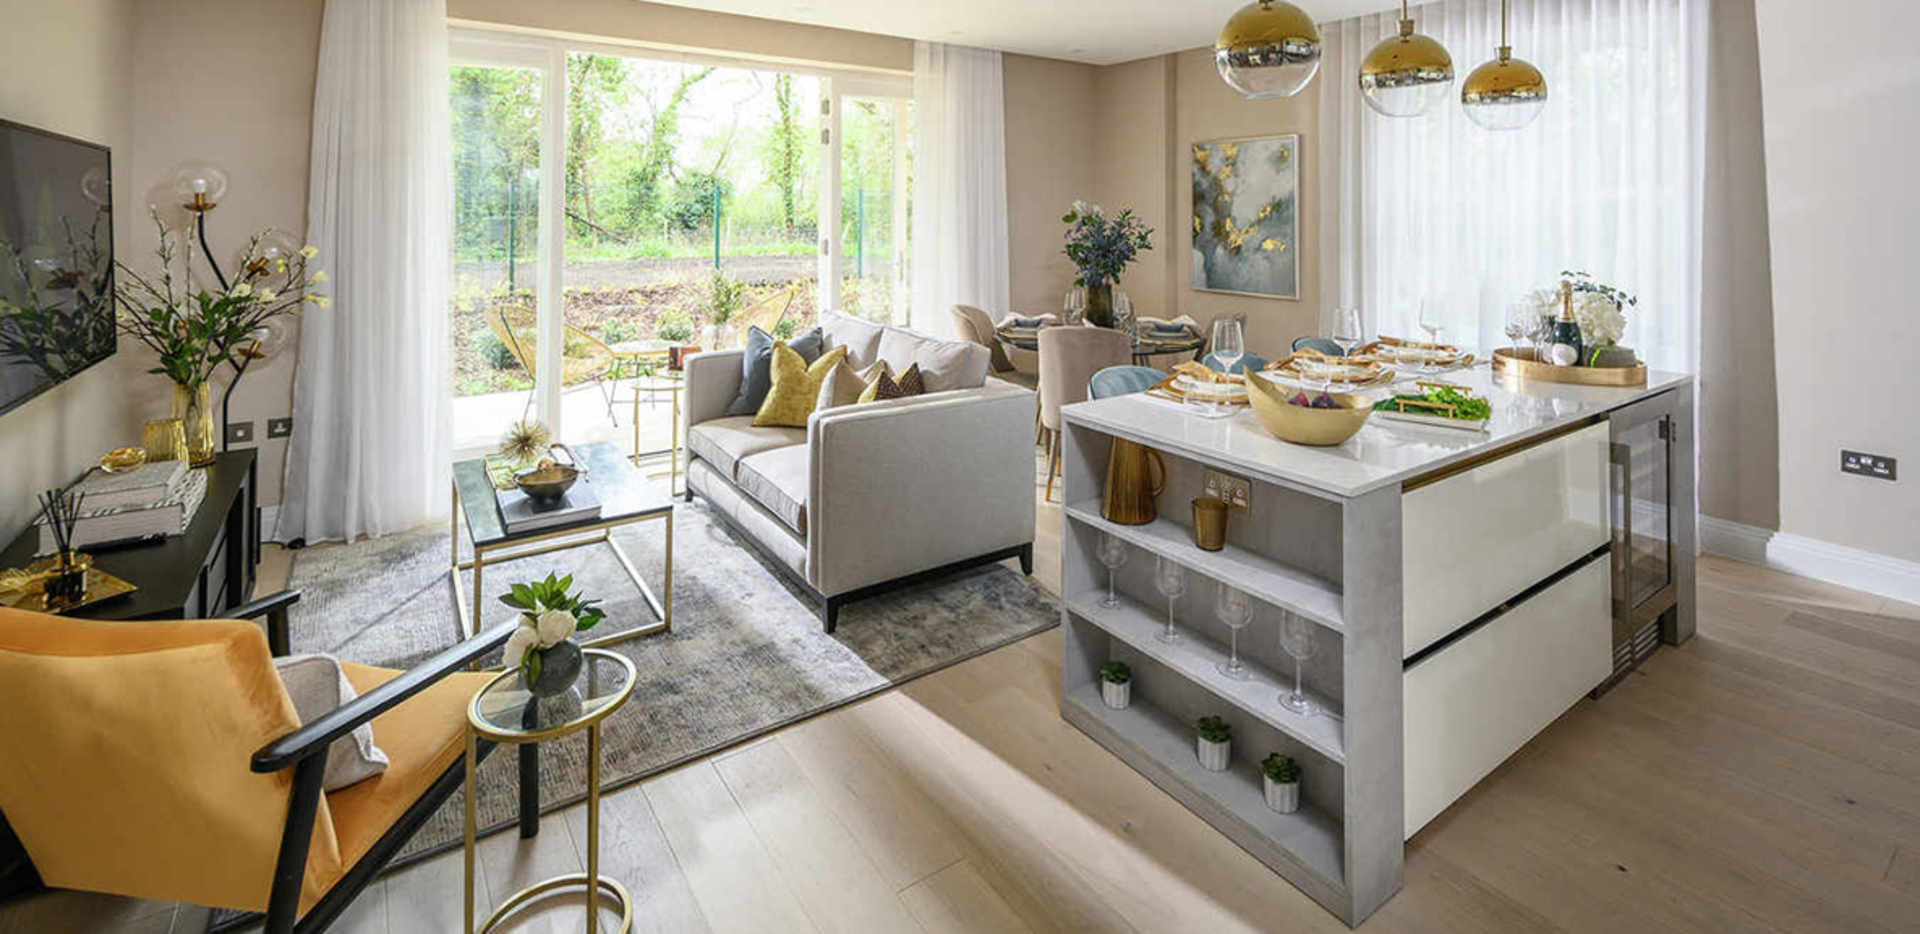 6 Ways to Bright Home for Summer, Bring out Flowers | Berkeley Inspiration